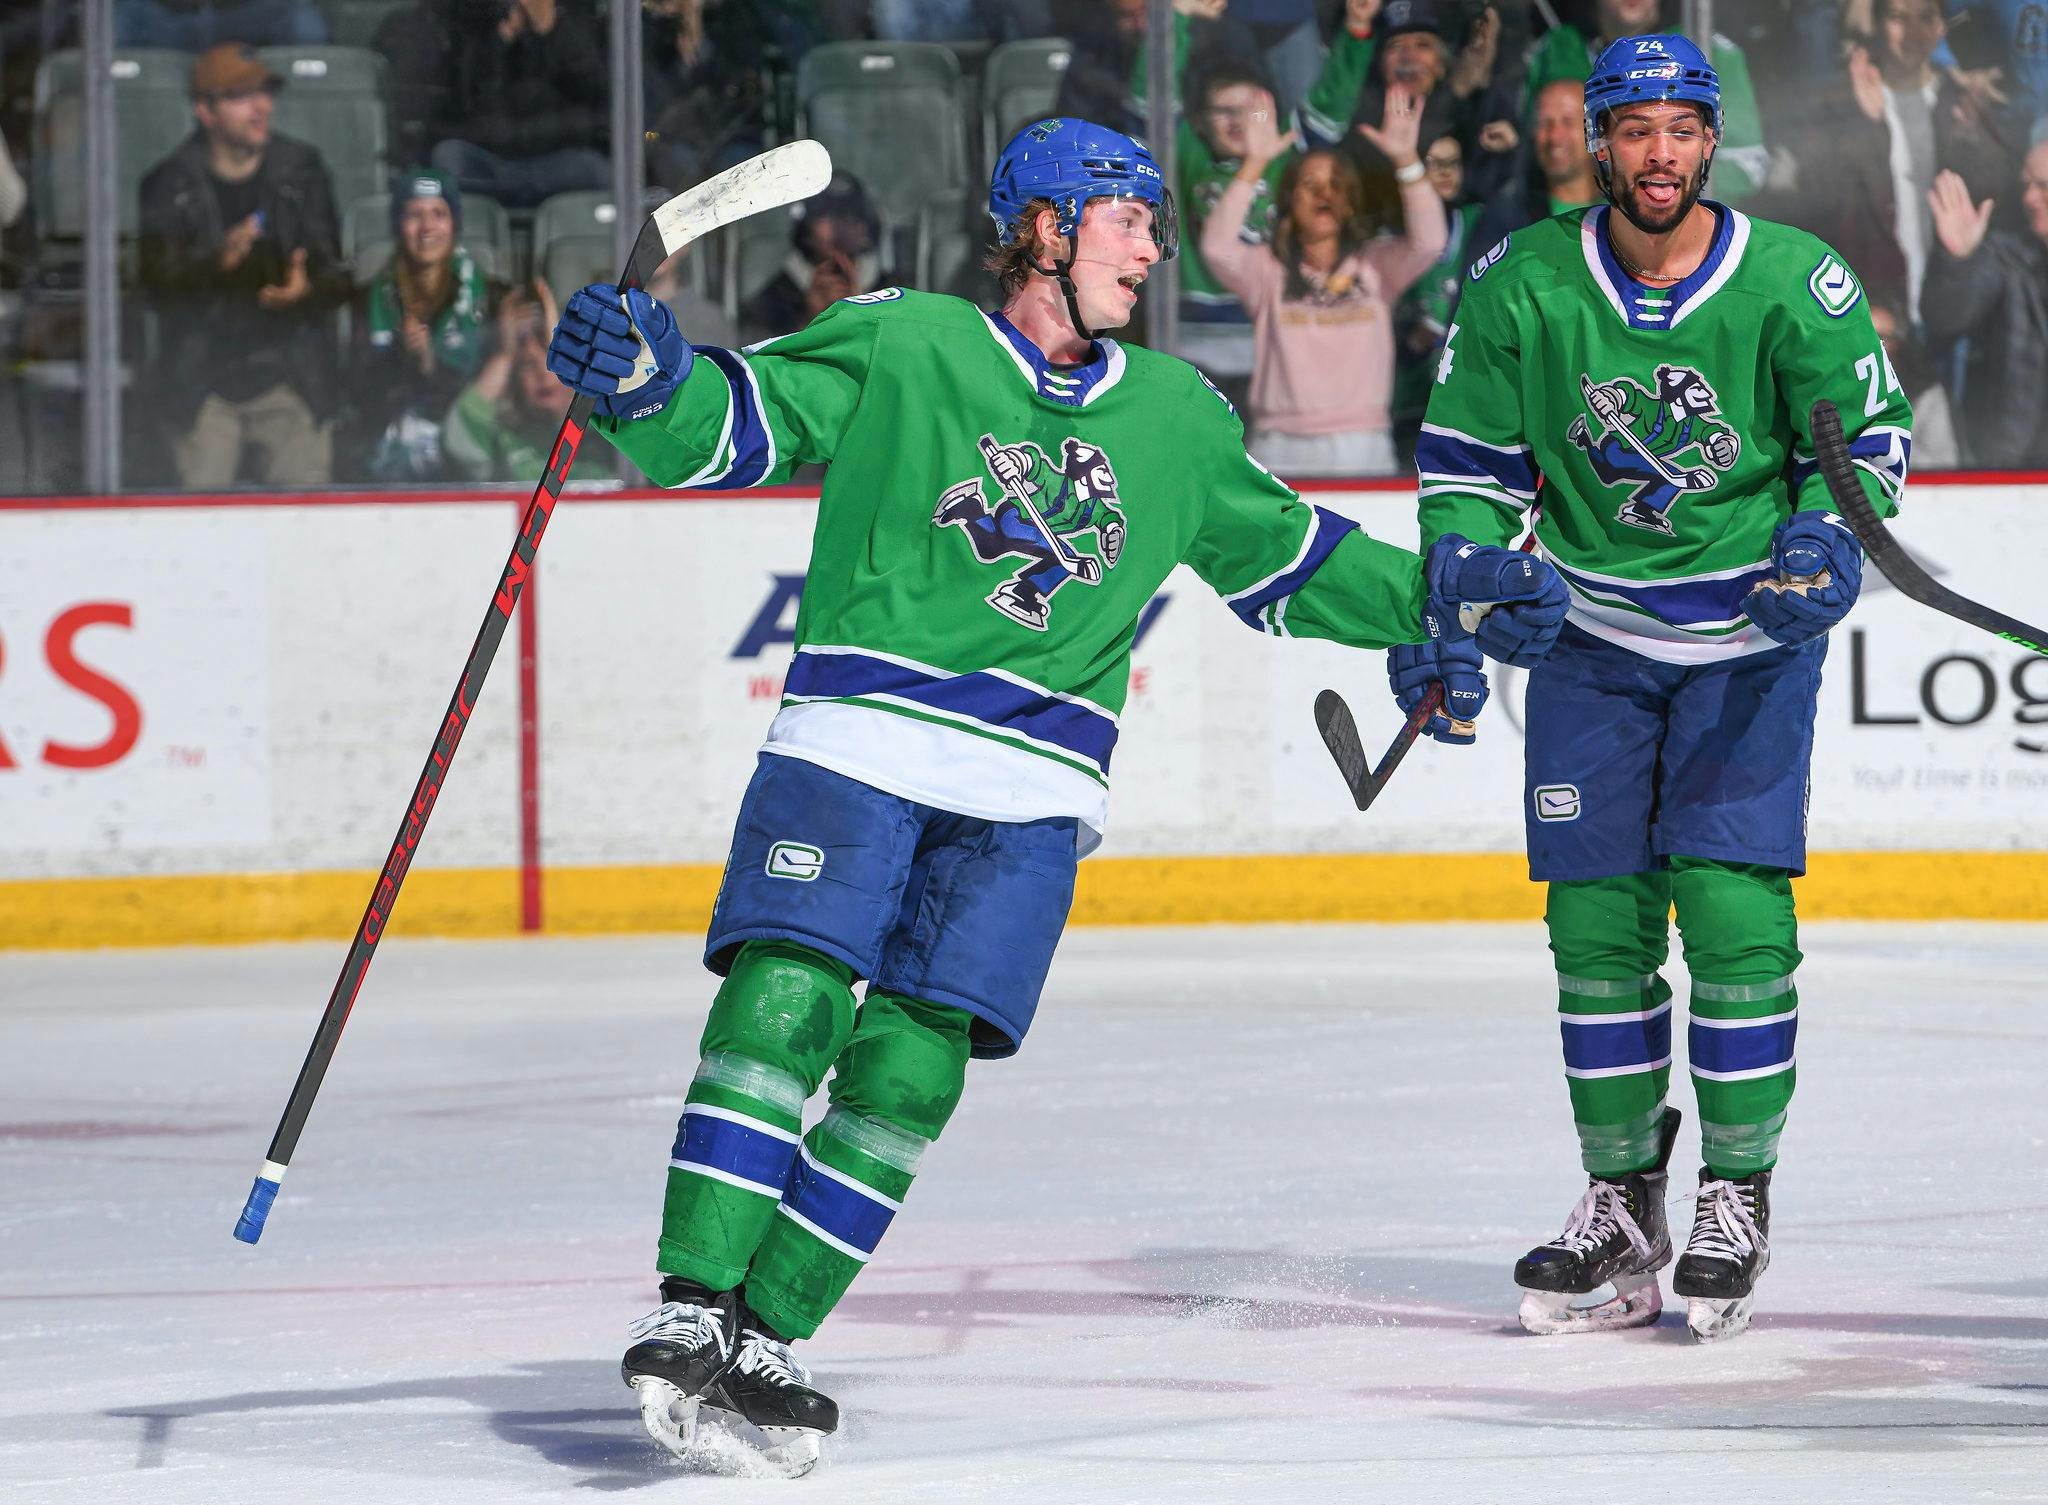 Abbotsford Canucks to hold training camp in Port Coquitlam from October